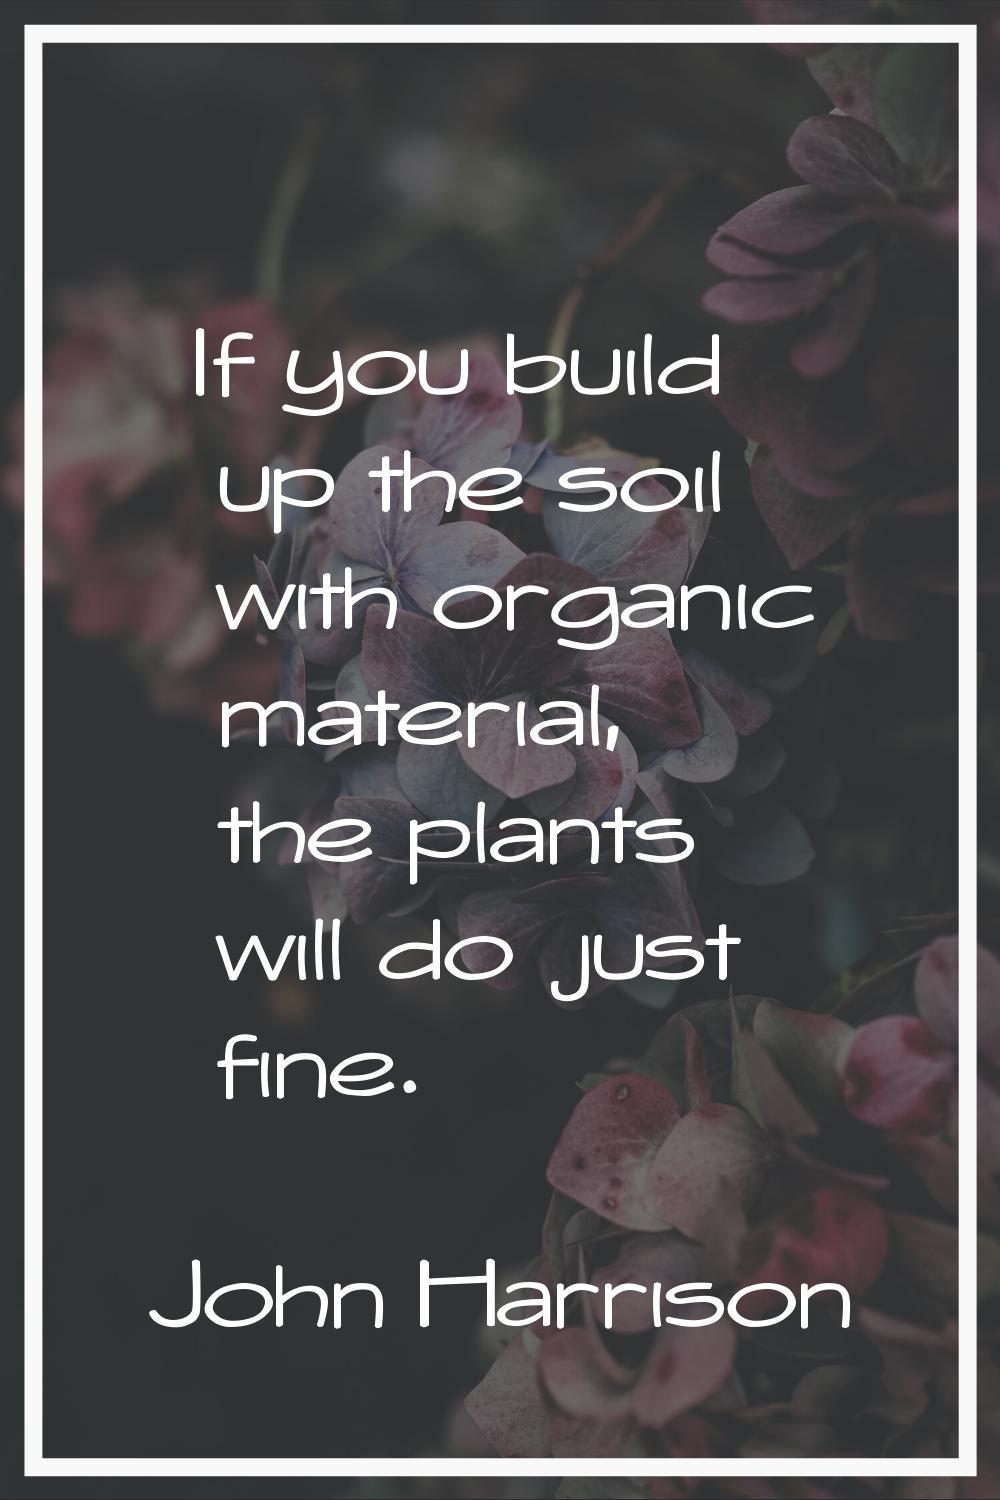 If you build up the soil with organic material, the plants will do just fine.